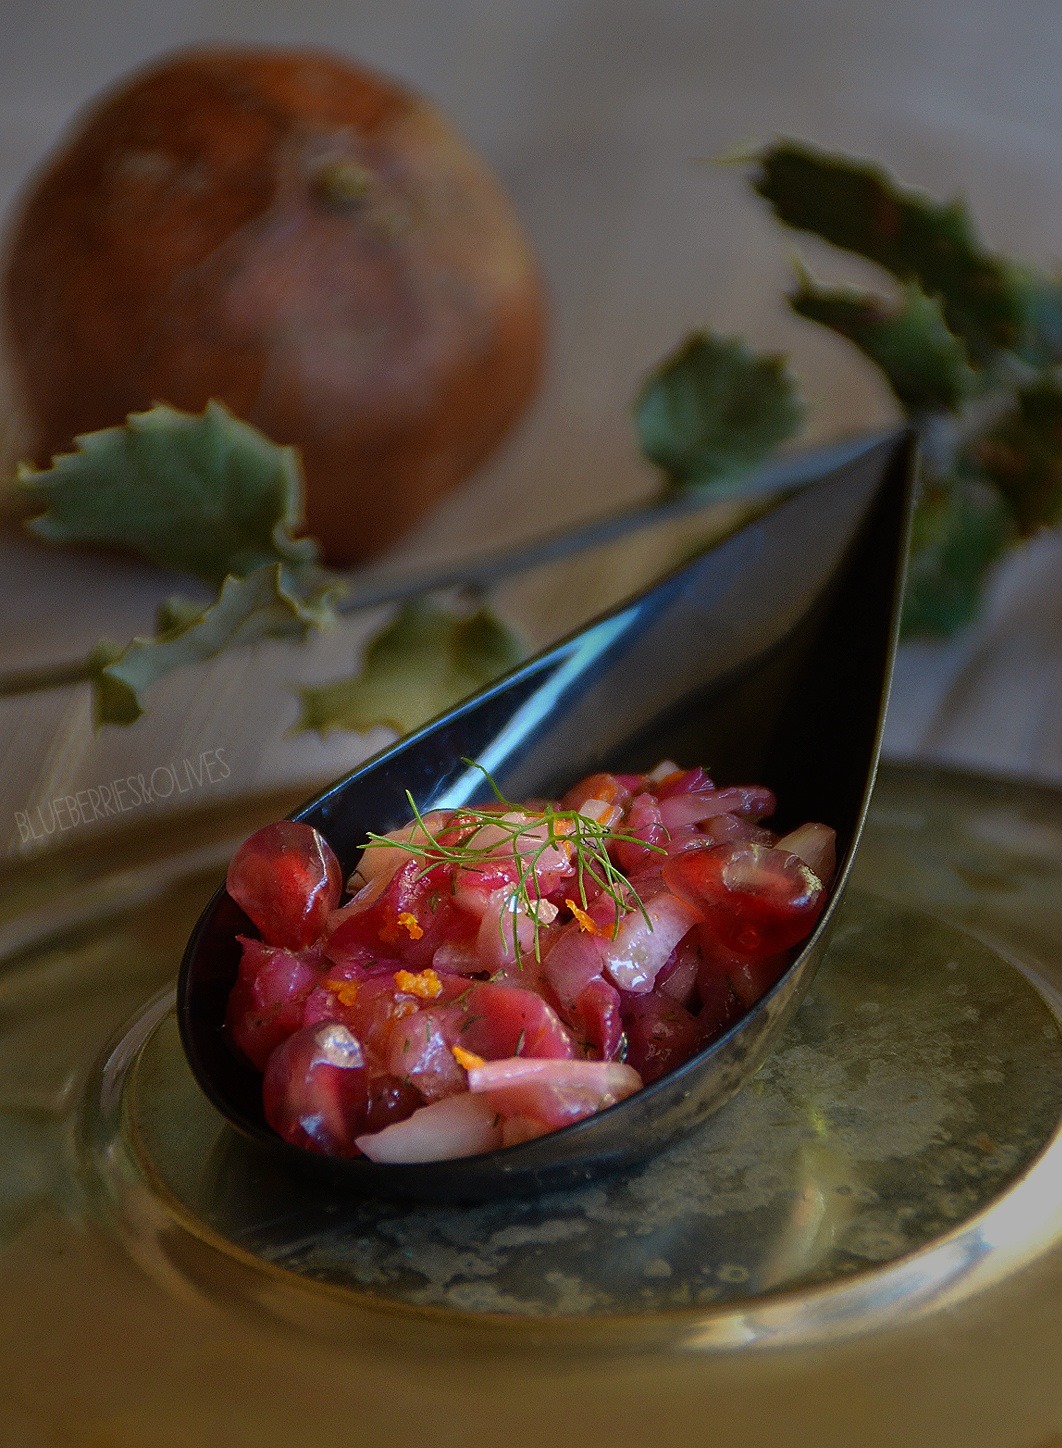 APPETIZER ON A SPOON WITH SALMON, FENNEL AND POMEGRANATE